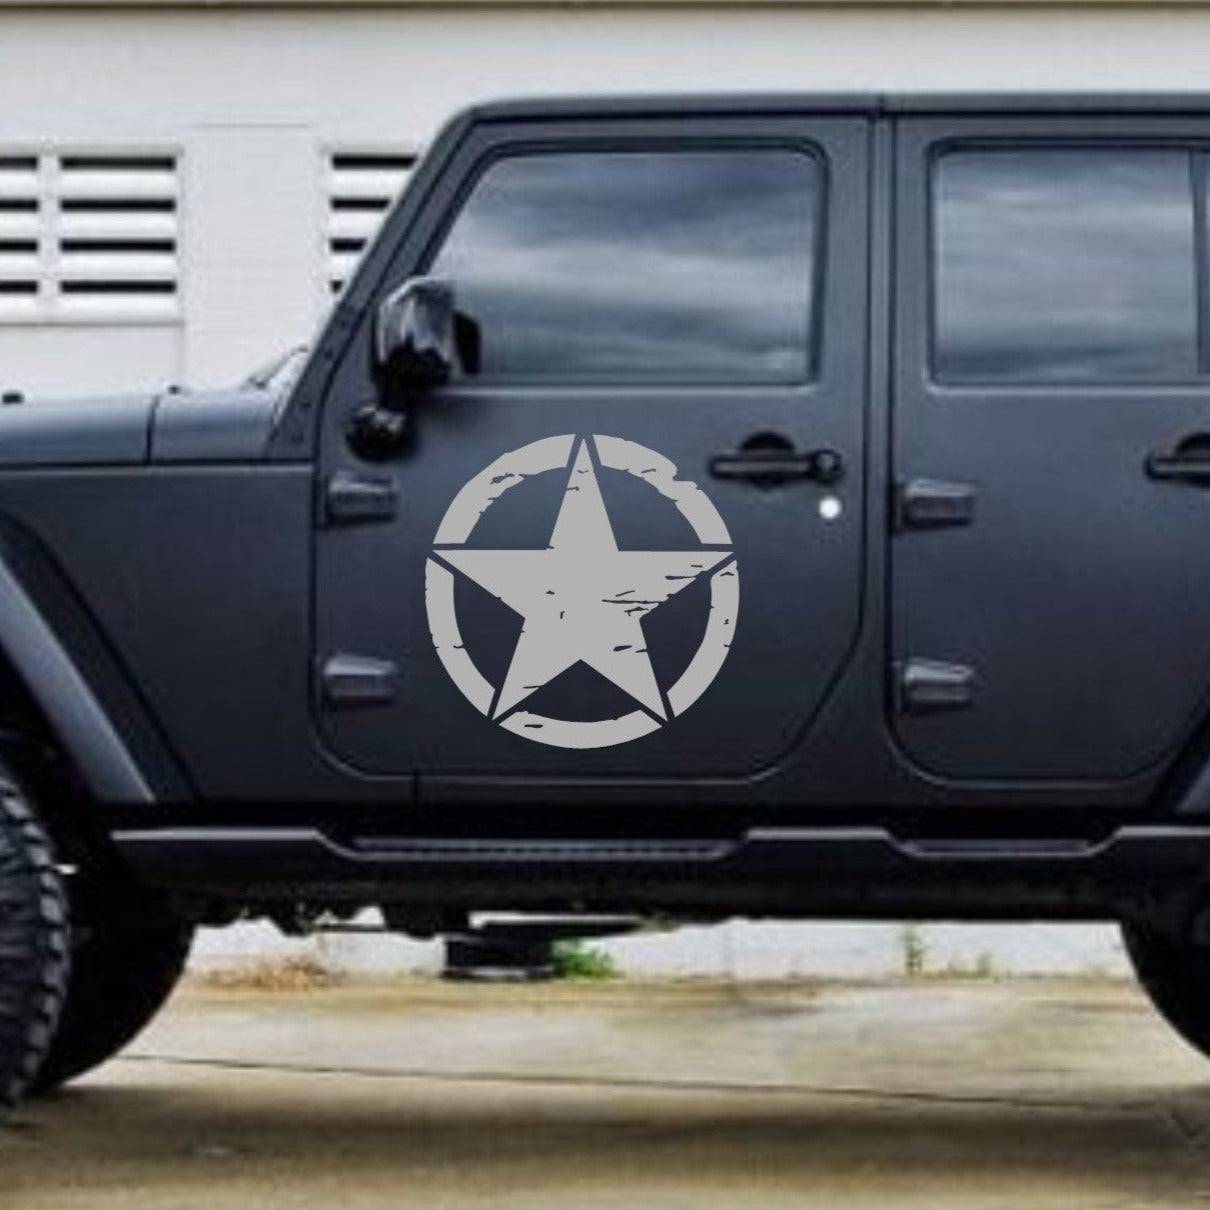 Military Star Decals for Trucks, Jeeps, Cars, SUVs | Sizes Available